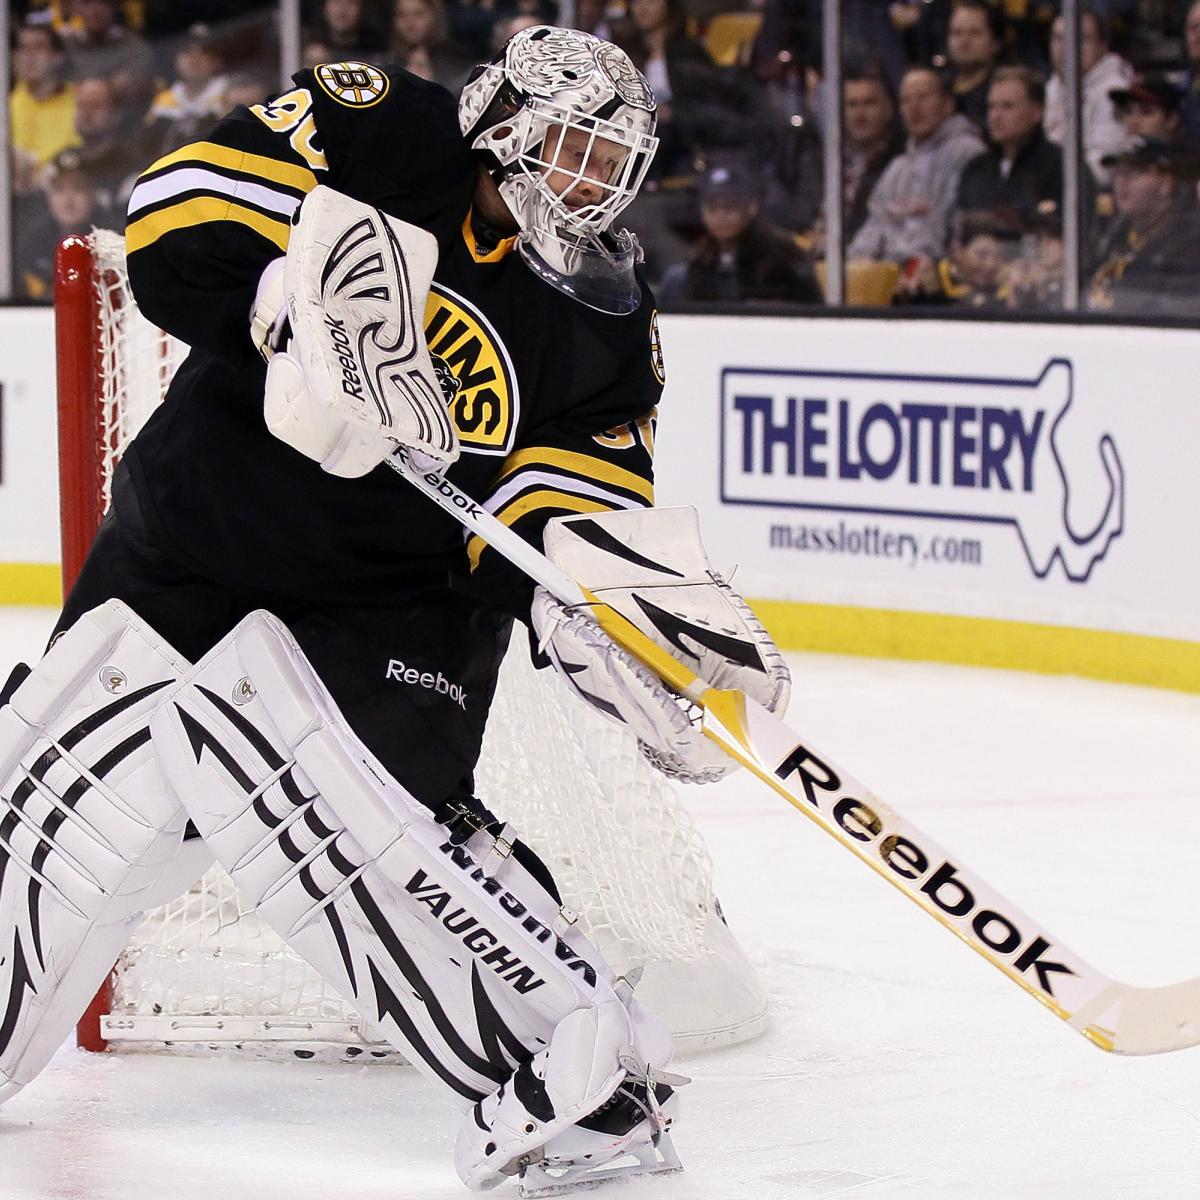 Boston Bruins goalie Tim Thomas proves again he can never be counted out